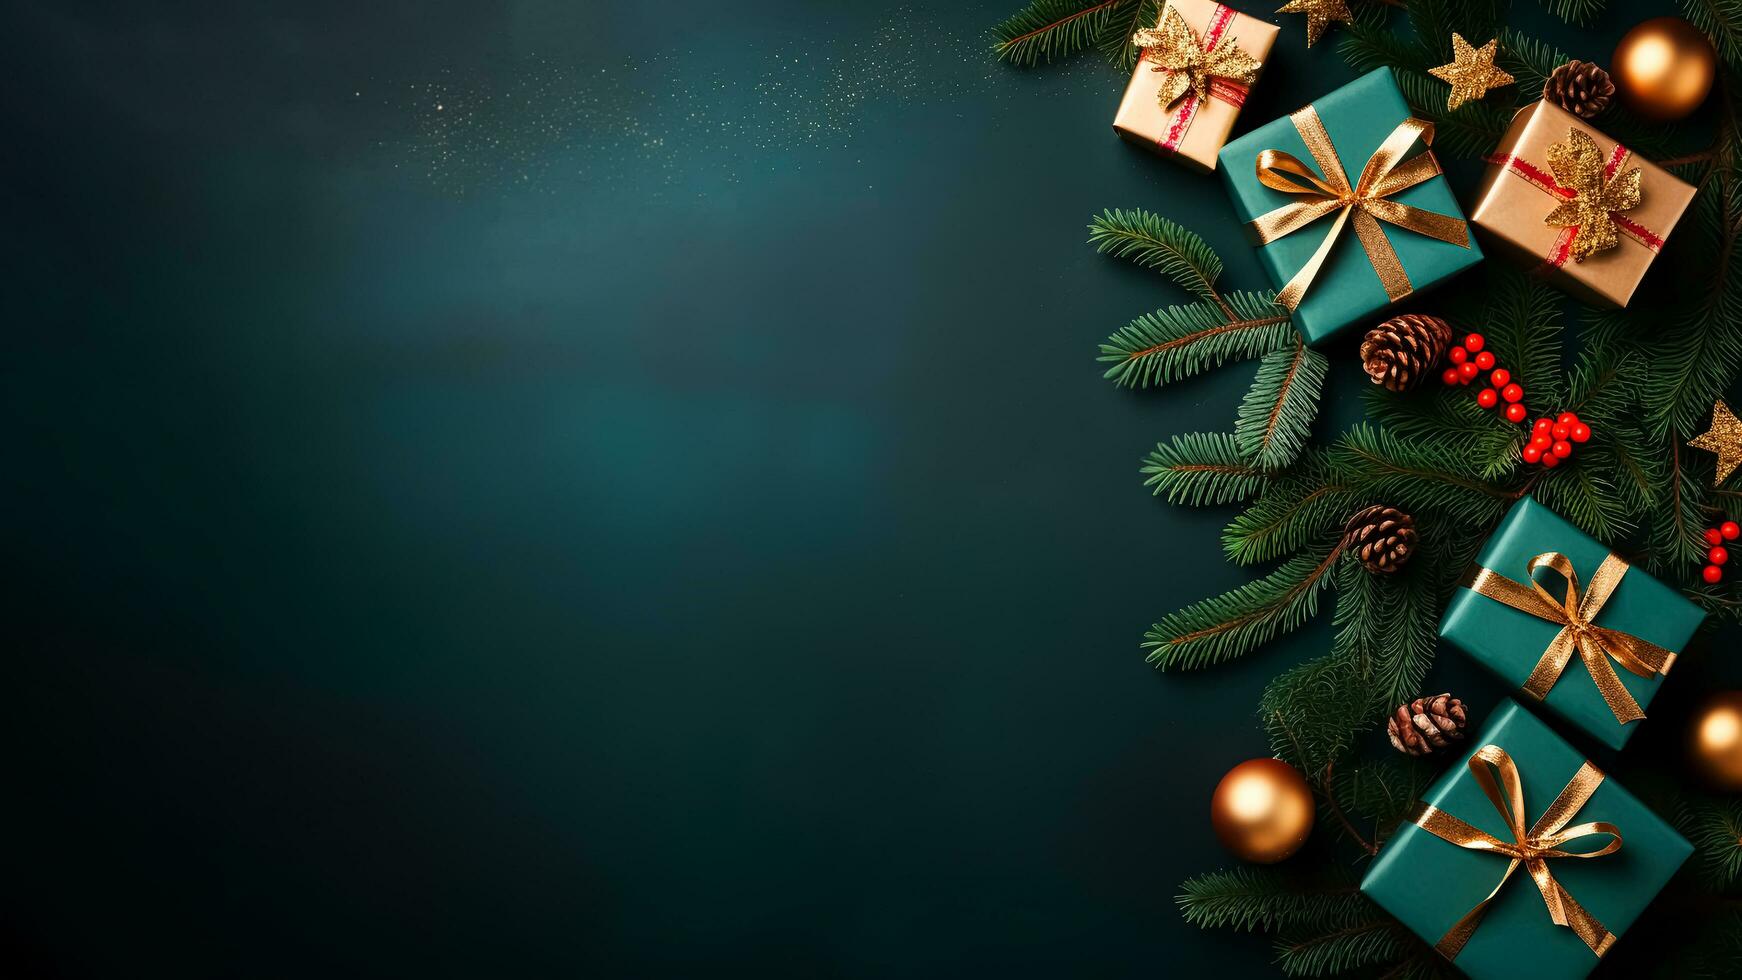 AI generated Christmas background design with rustic decors, fir tree branch, turquoise gift box with golden ribbon, red berries. pine cones, shiny balls, glittering stars. Top view, flatlay photo